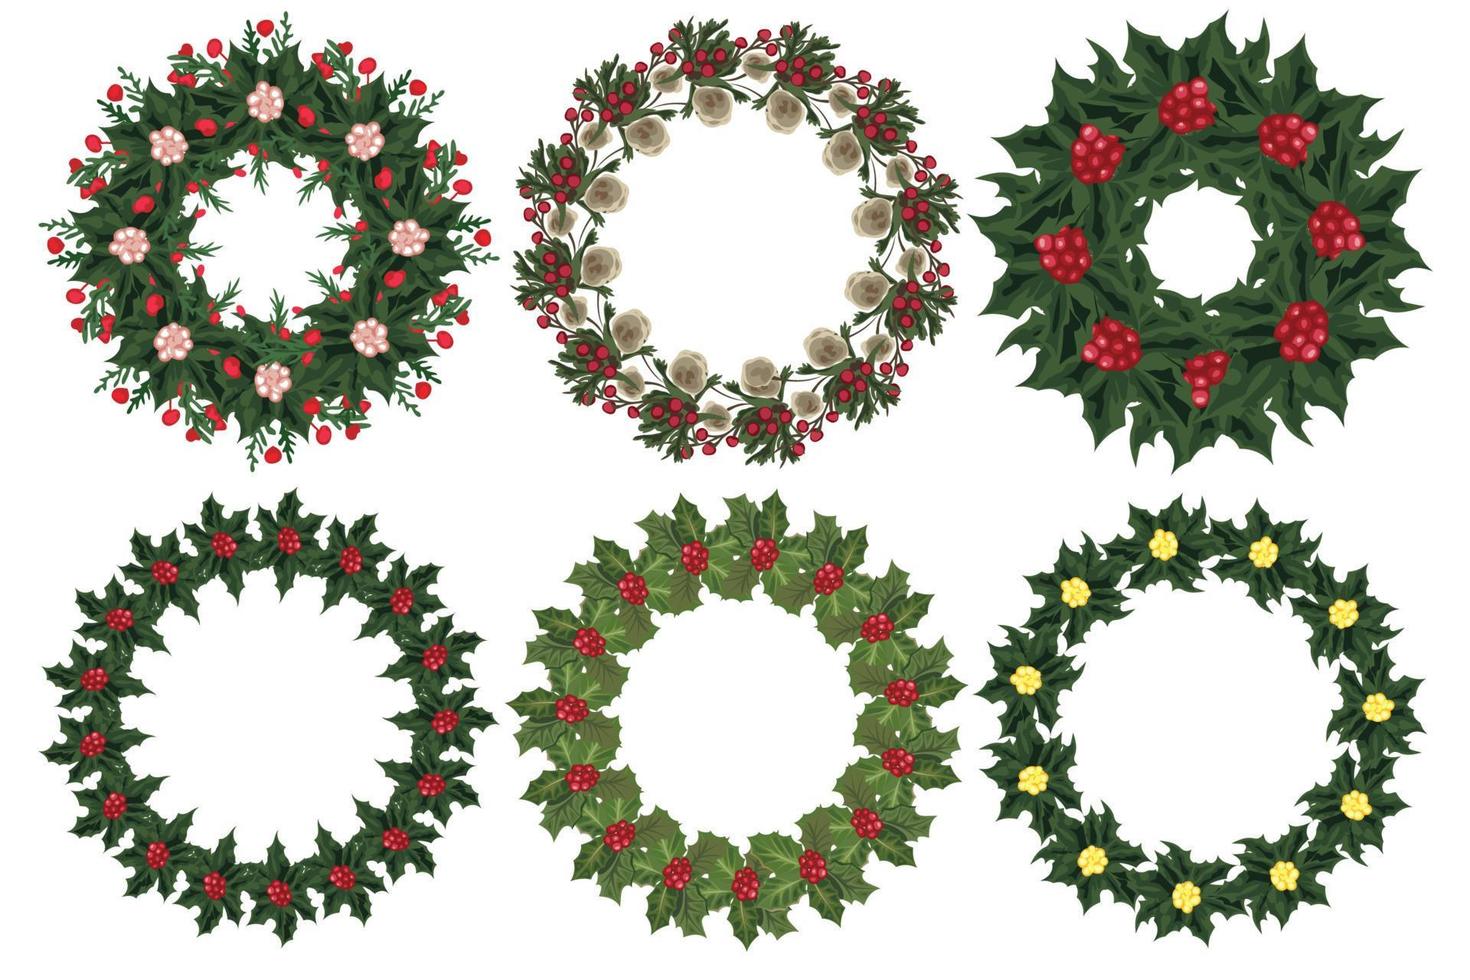 Set of Christmas wreath with winter floral elements. Vector illustration.